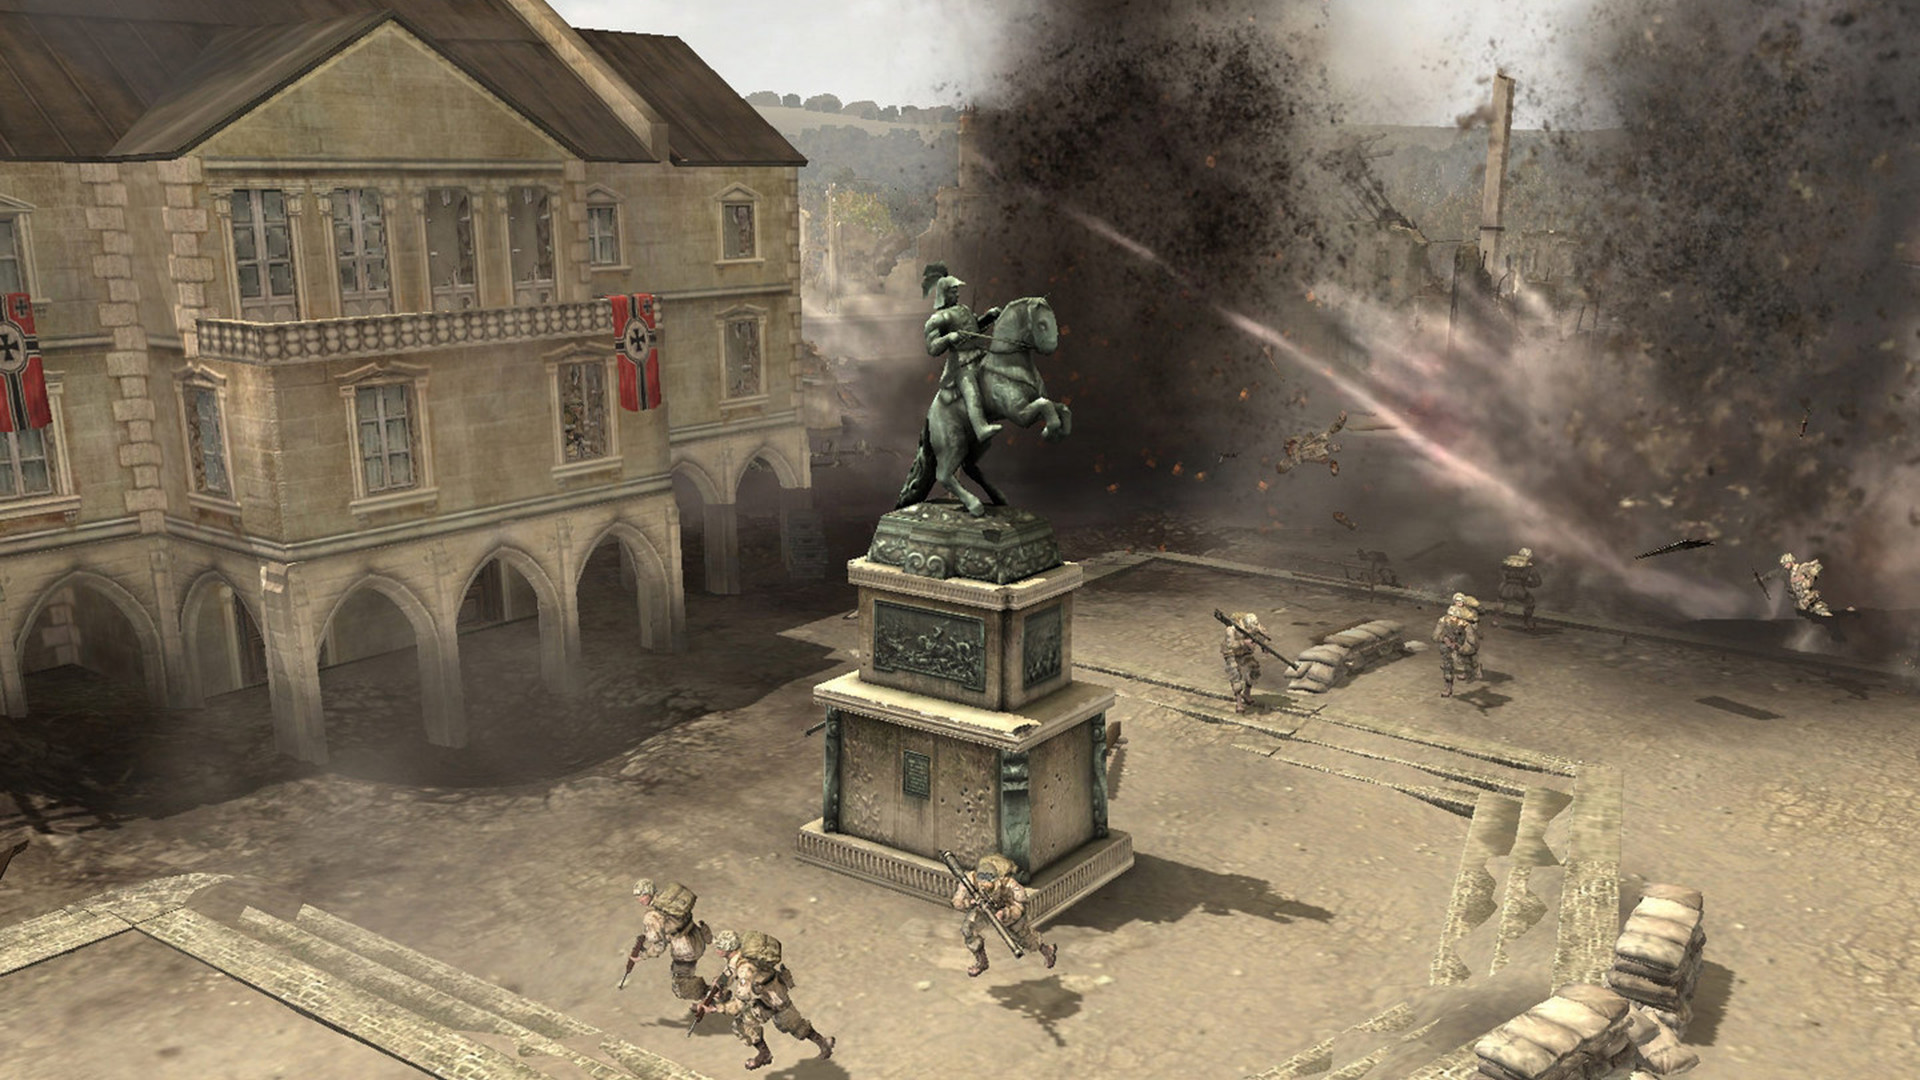 Best mobile strategy games: Company of Heroes. Image shows a town square amidst armed warfare.